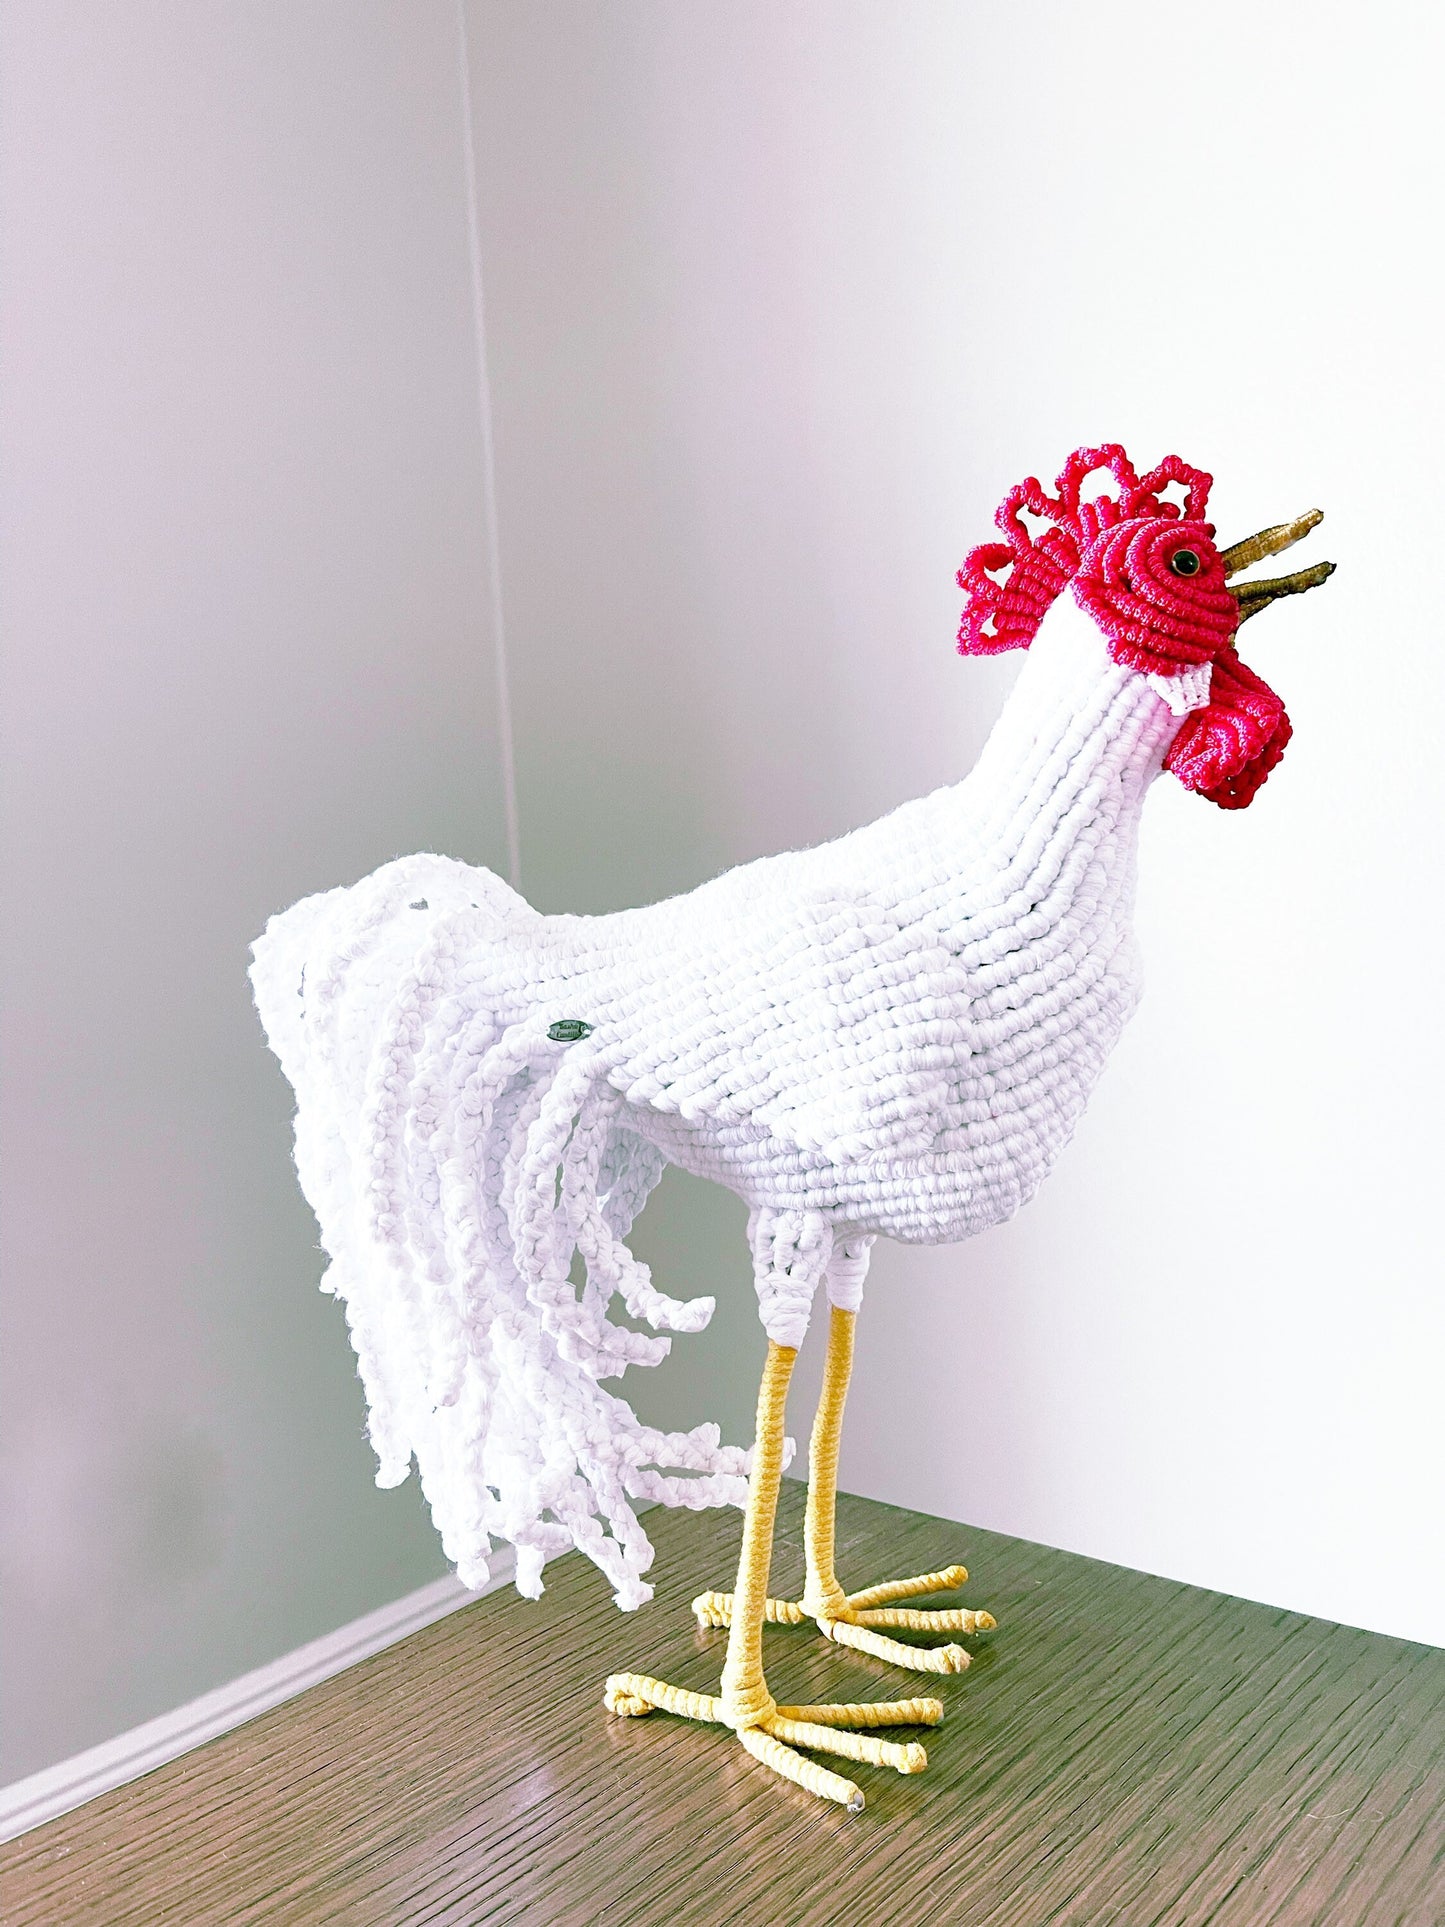 Macrame Rooster/ Rooster Art/ Rooster Sculpture/ Rooster Decor